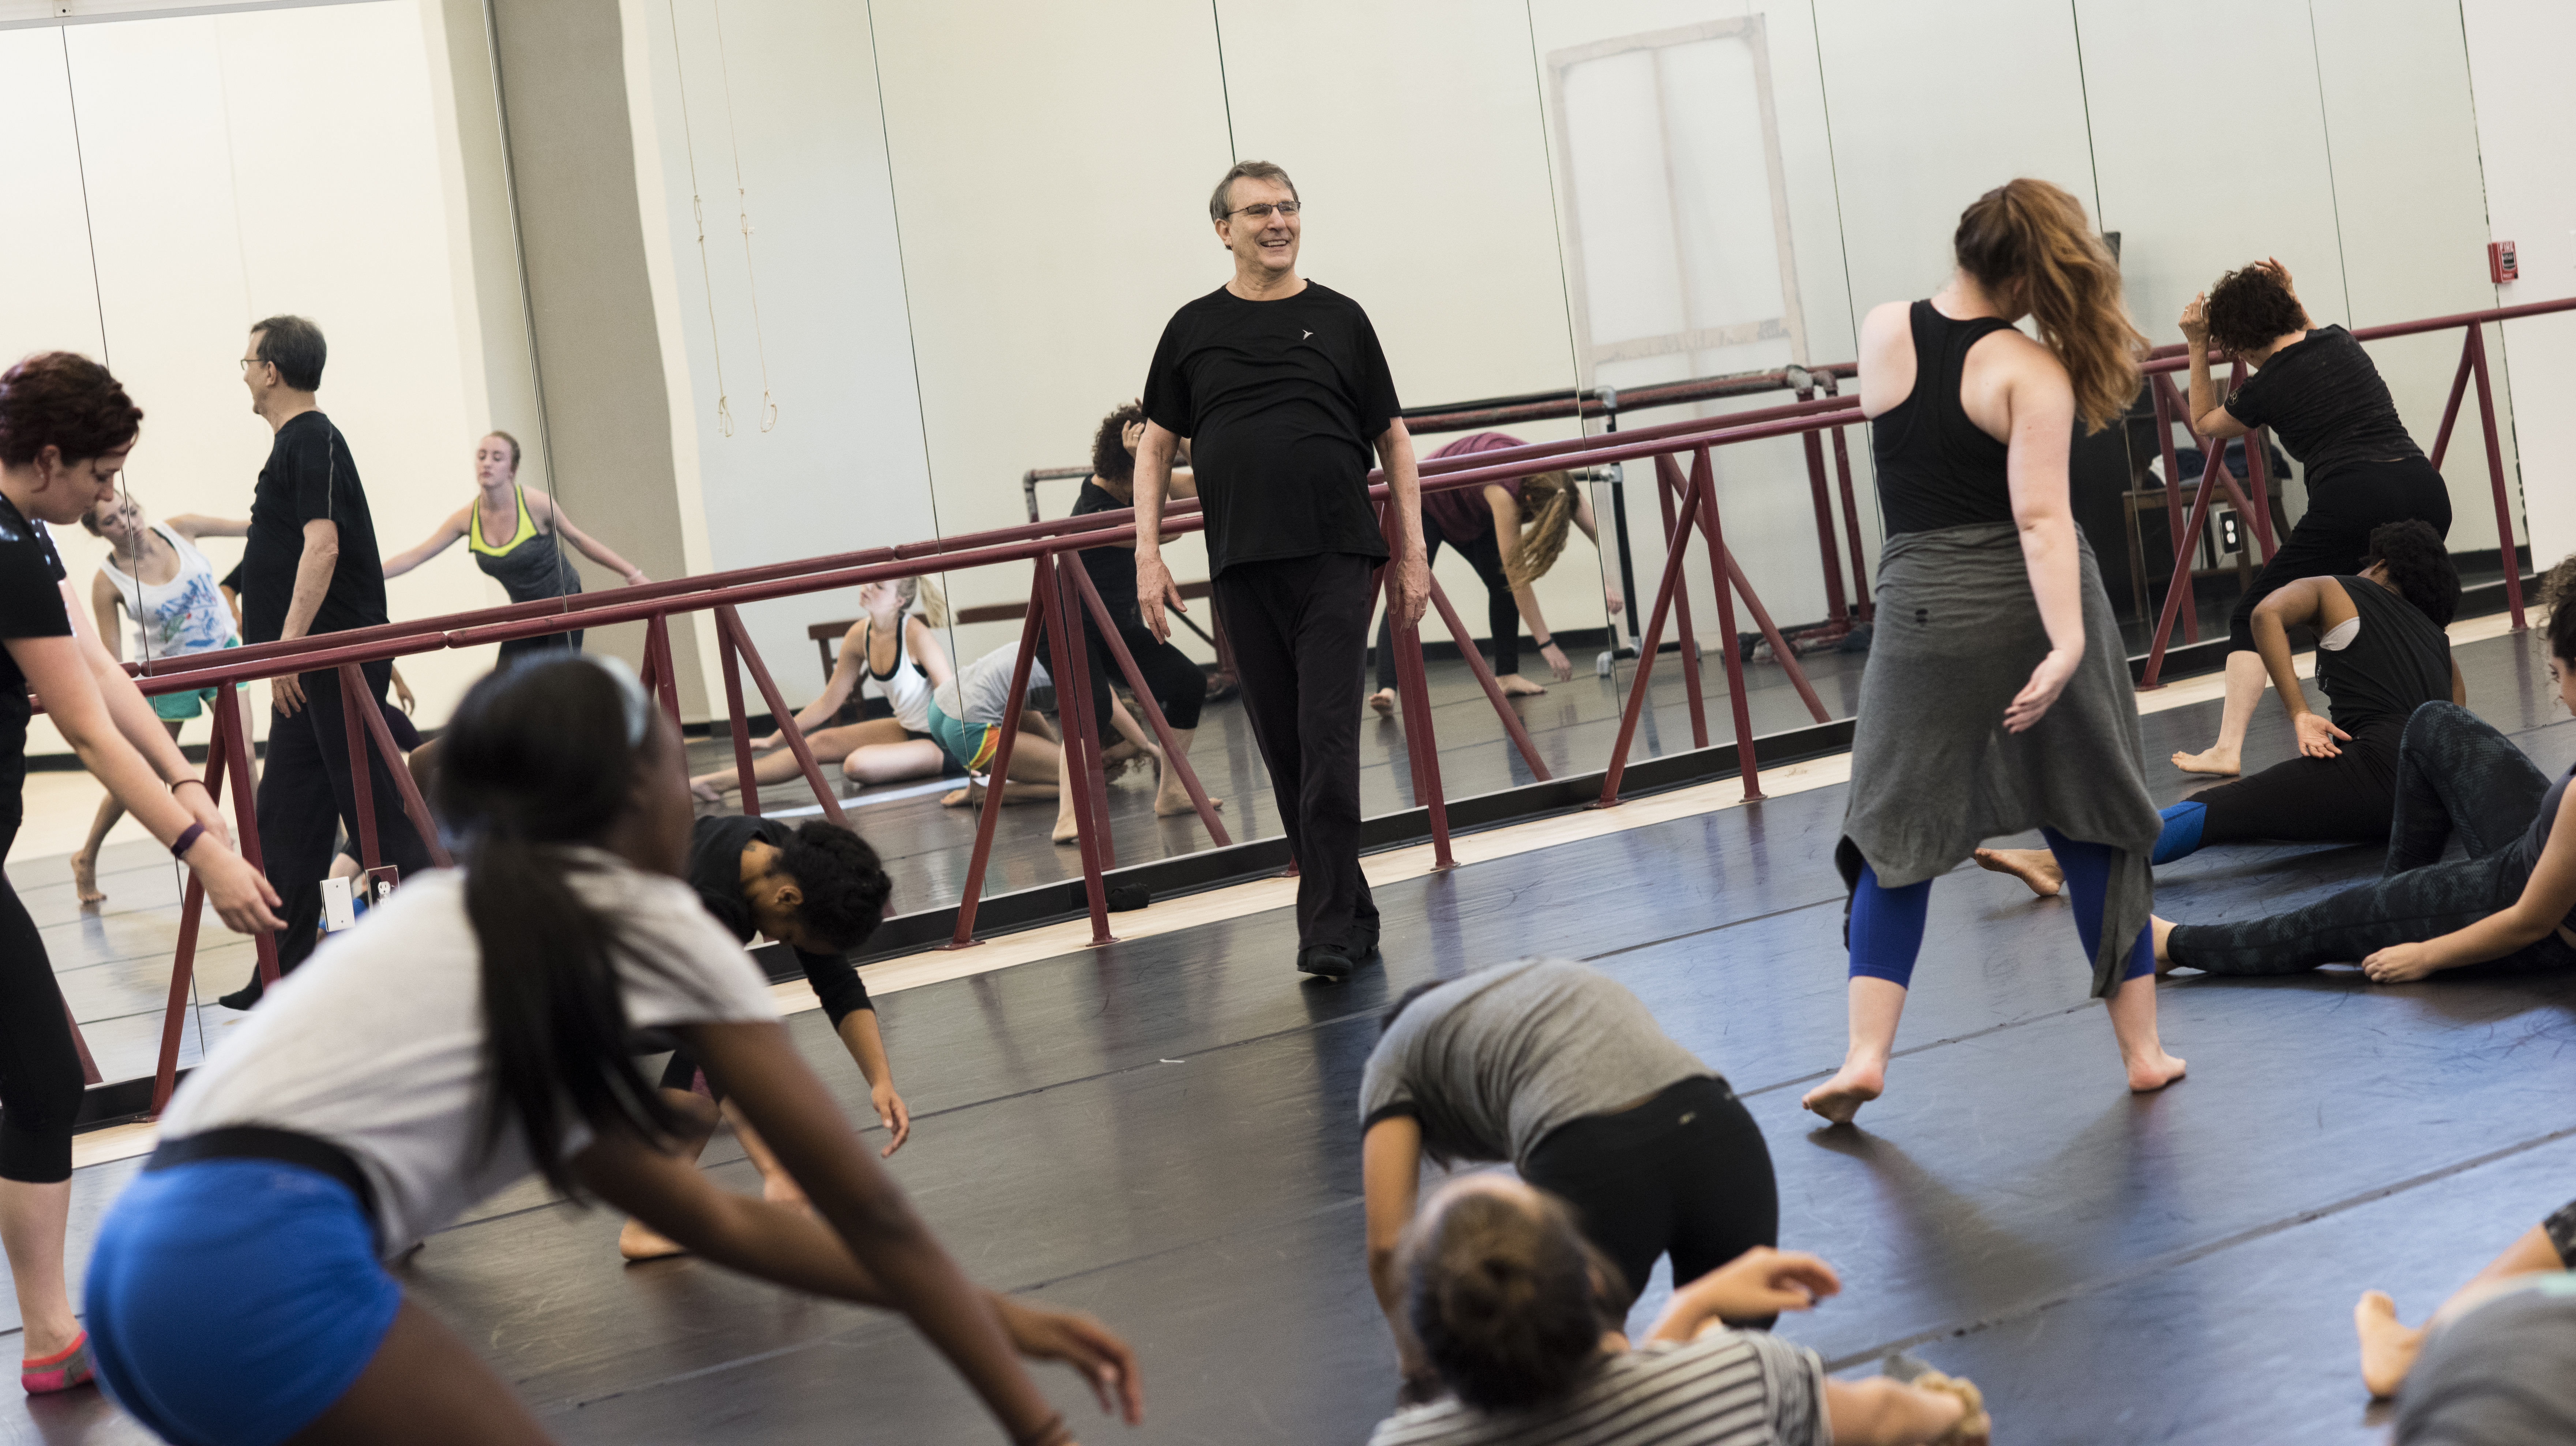 Choreographer Bill Evans led rehearsals for University of North Texas dance students for the Faculty Dance Concert Feb. 9-12. Photo by Ahna Hubnik.